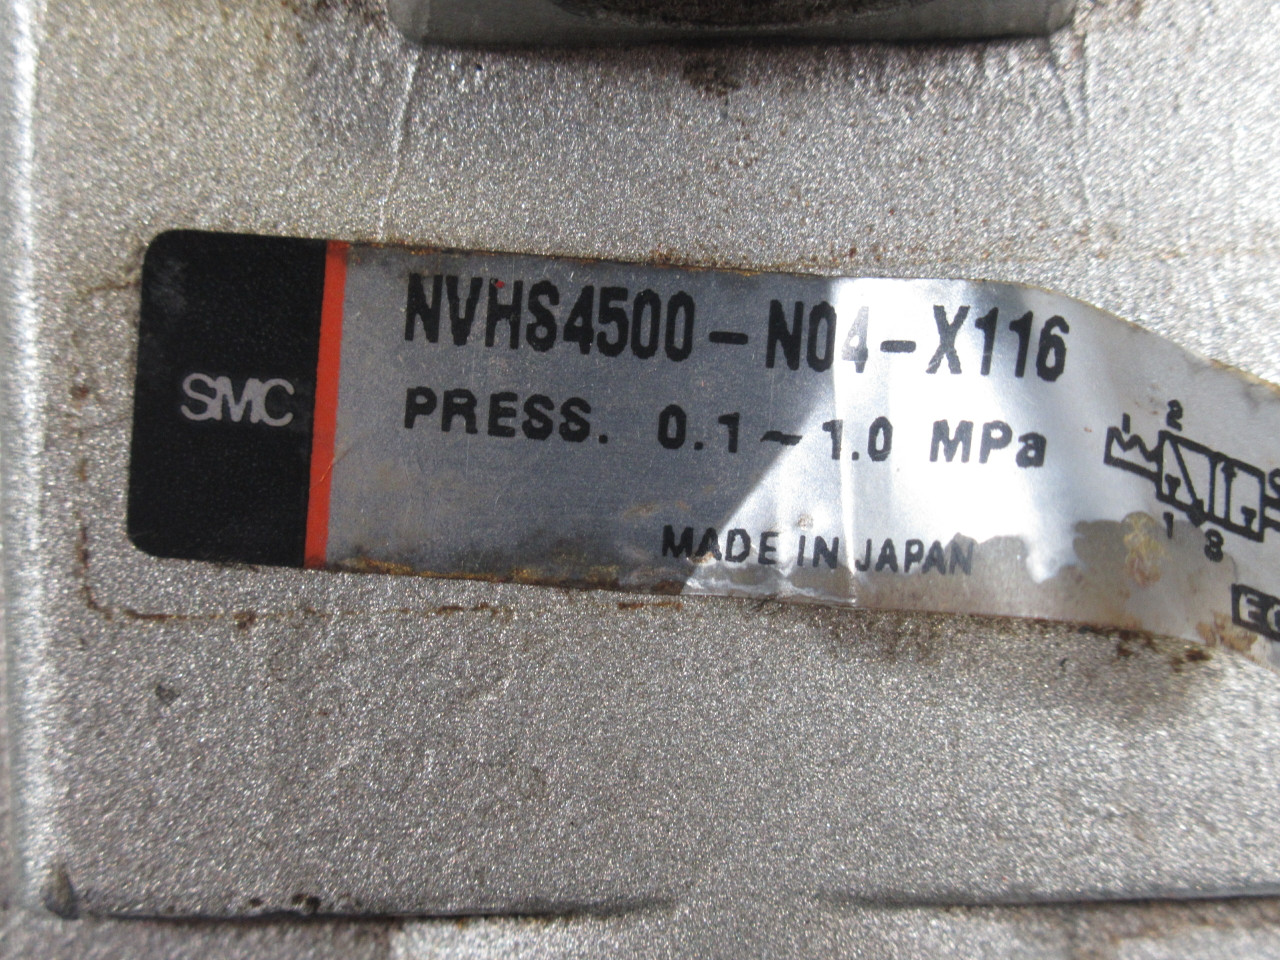 SMC NVHS4500-N04-X116 Relief Pneumatic Valve 1MPa 15-150 psi 1/2" NPT USED